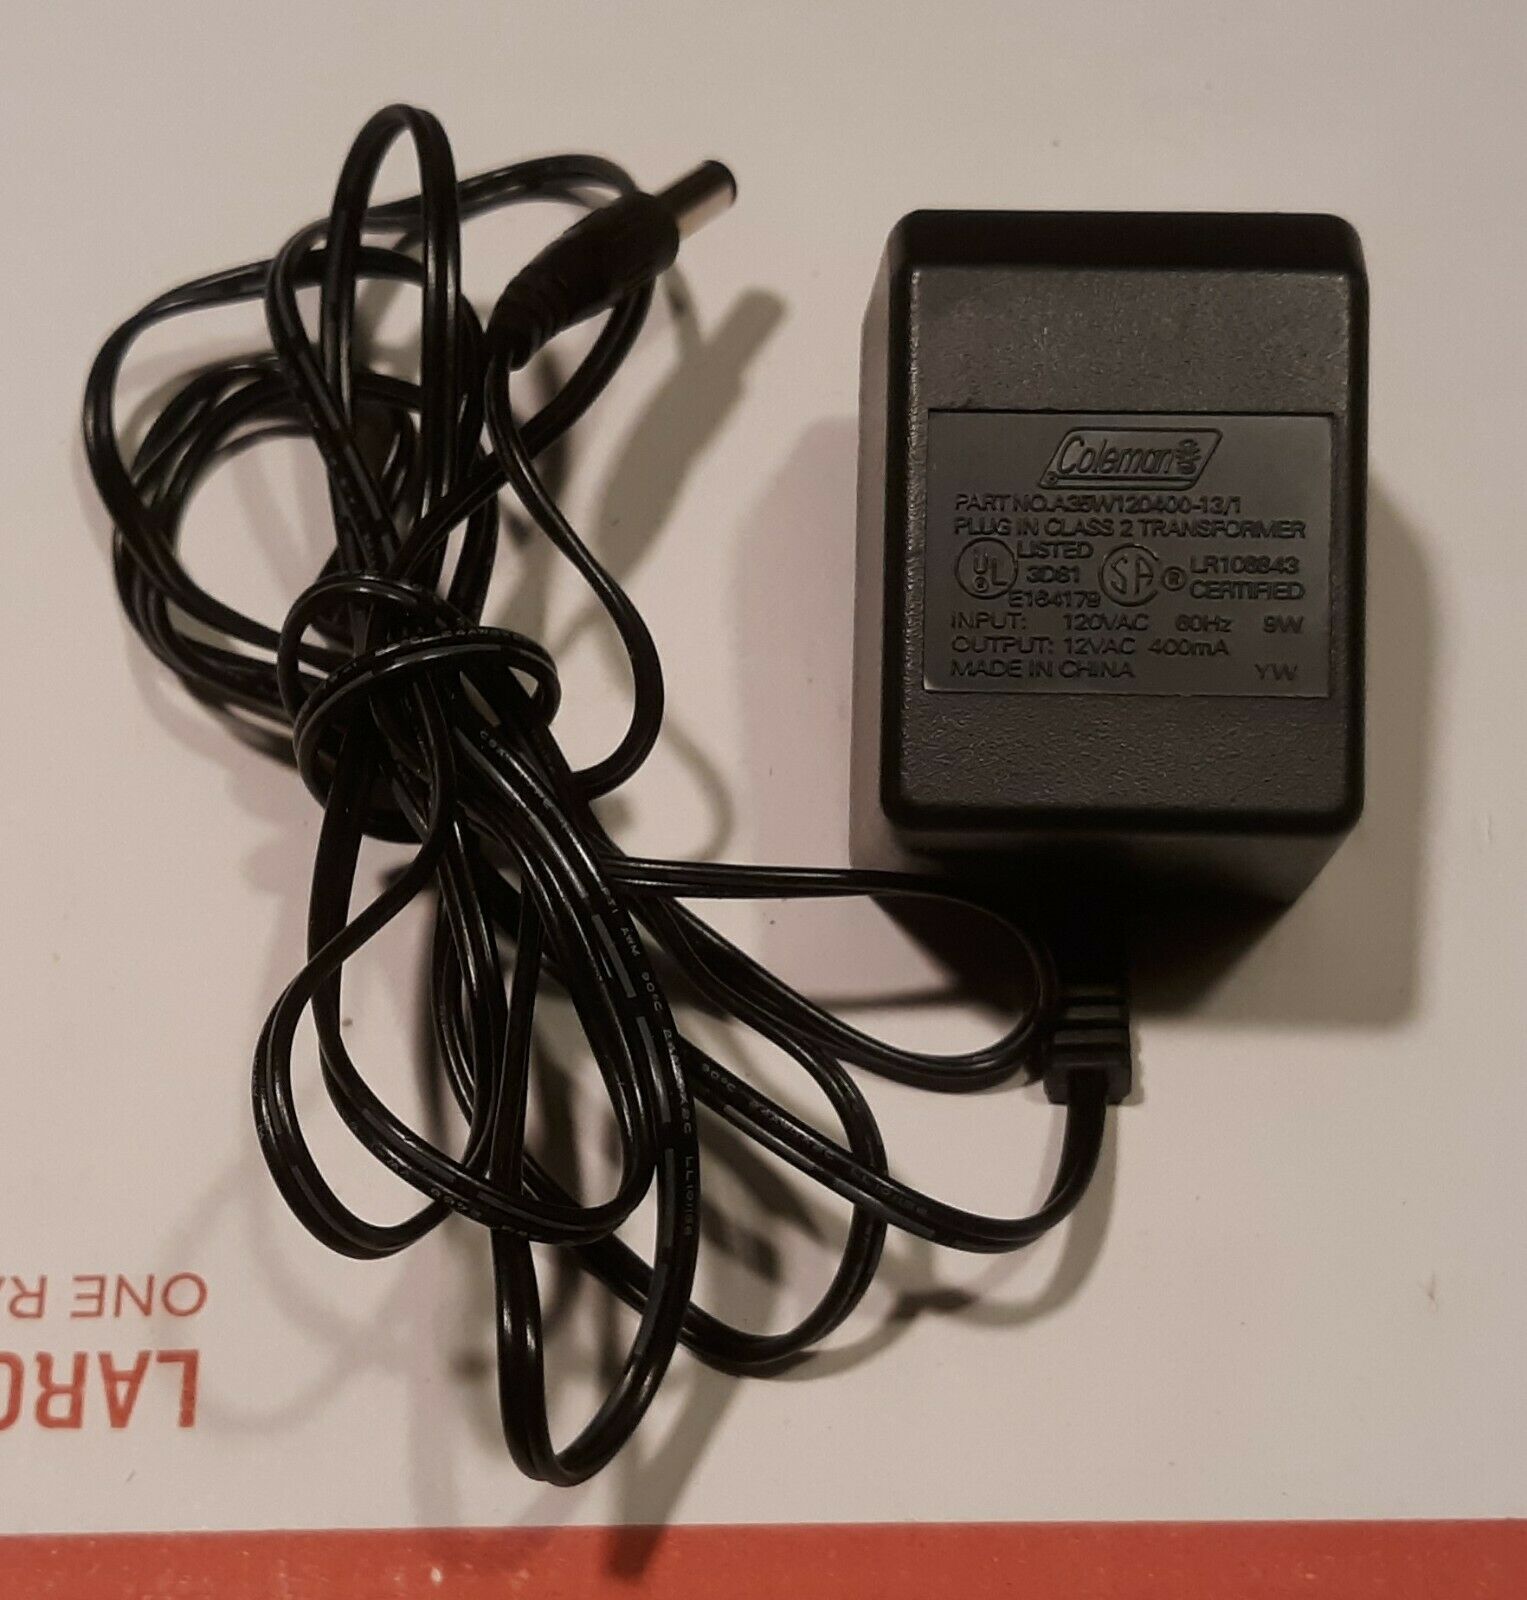 Coleman Power Adapter #A35W120400-13/1, 12VAC @ 400mA, 5.5mm Tip, Tested Connection Split/Duplication: 1:9 Type: Ada